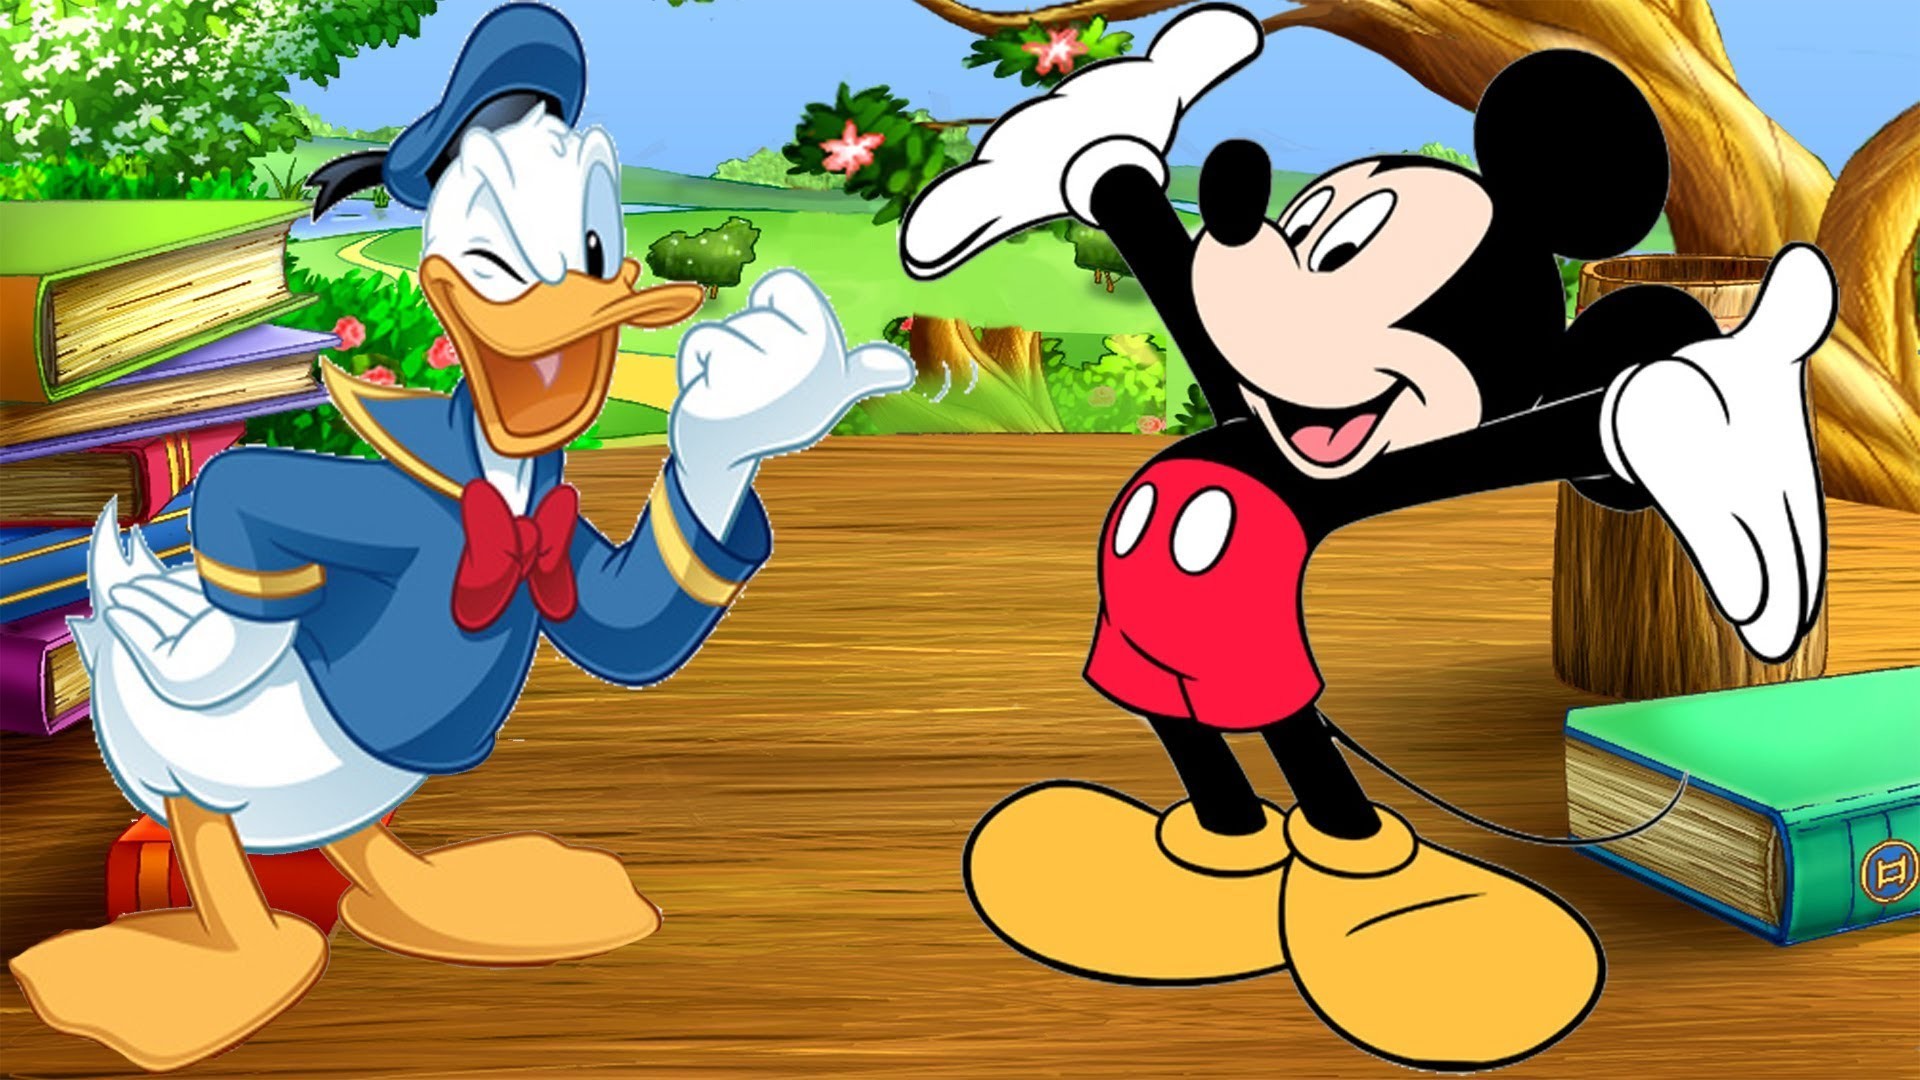 Micky Mouse Christmas Cartoons Wallpapers For Childrens 1920x1080.